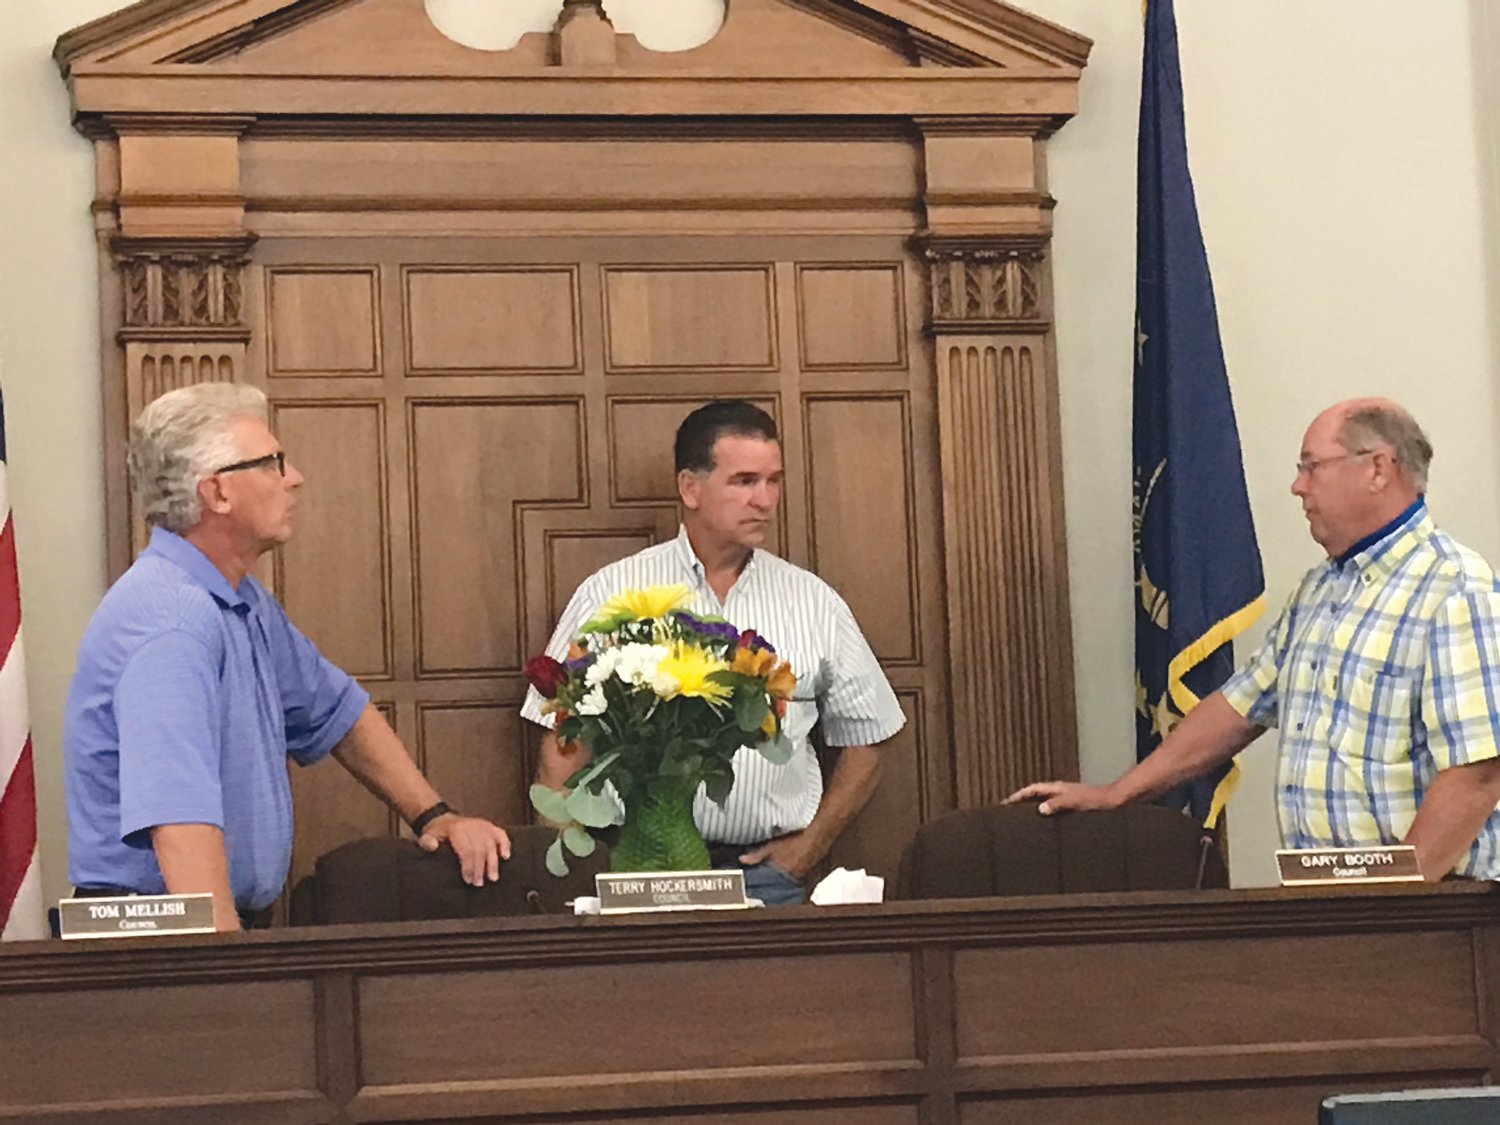 Montgomery County Council members, from left, Tom Mellish, Mark Smith and Gary Booth have a conversation before Tuesday's meeting in the City Building. The bouquet of flowers marked the seat of council president Terry Hockersmith, who died Thursday.